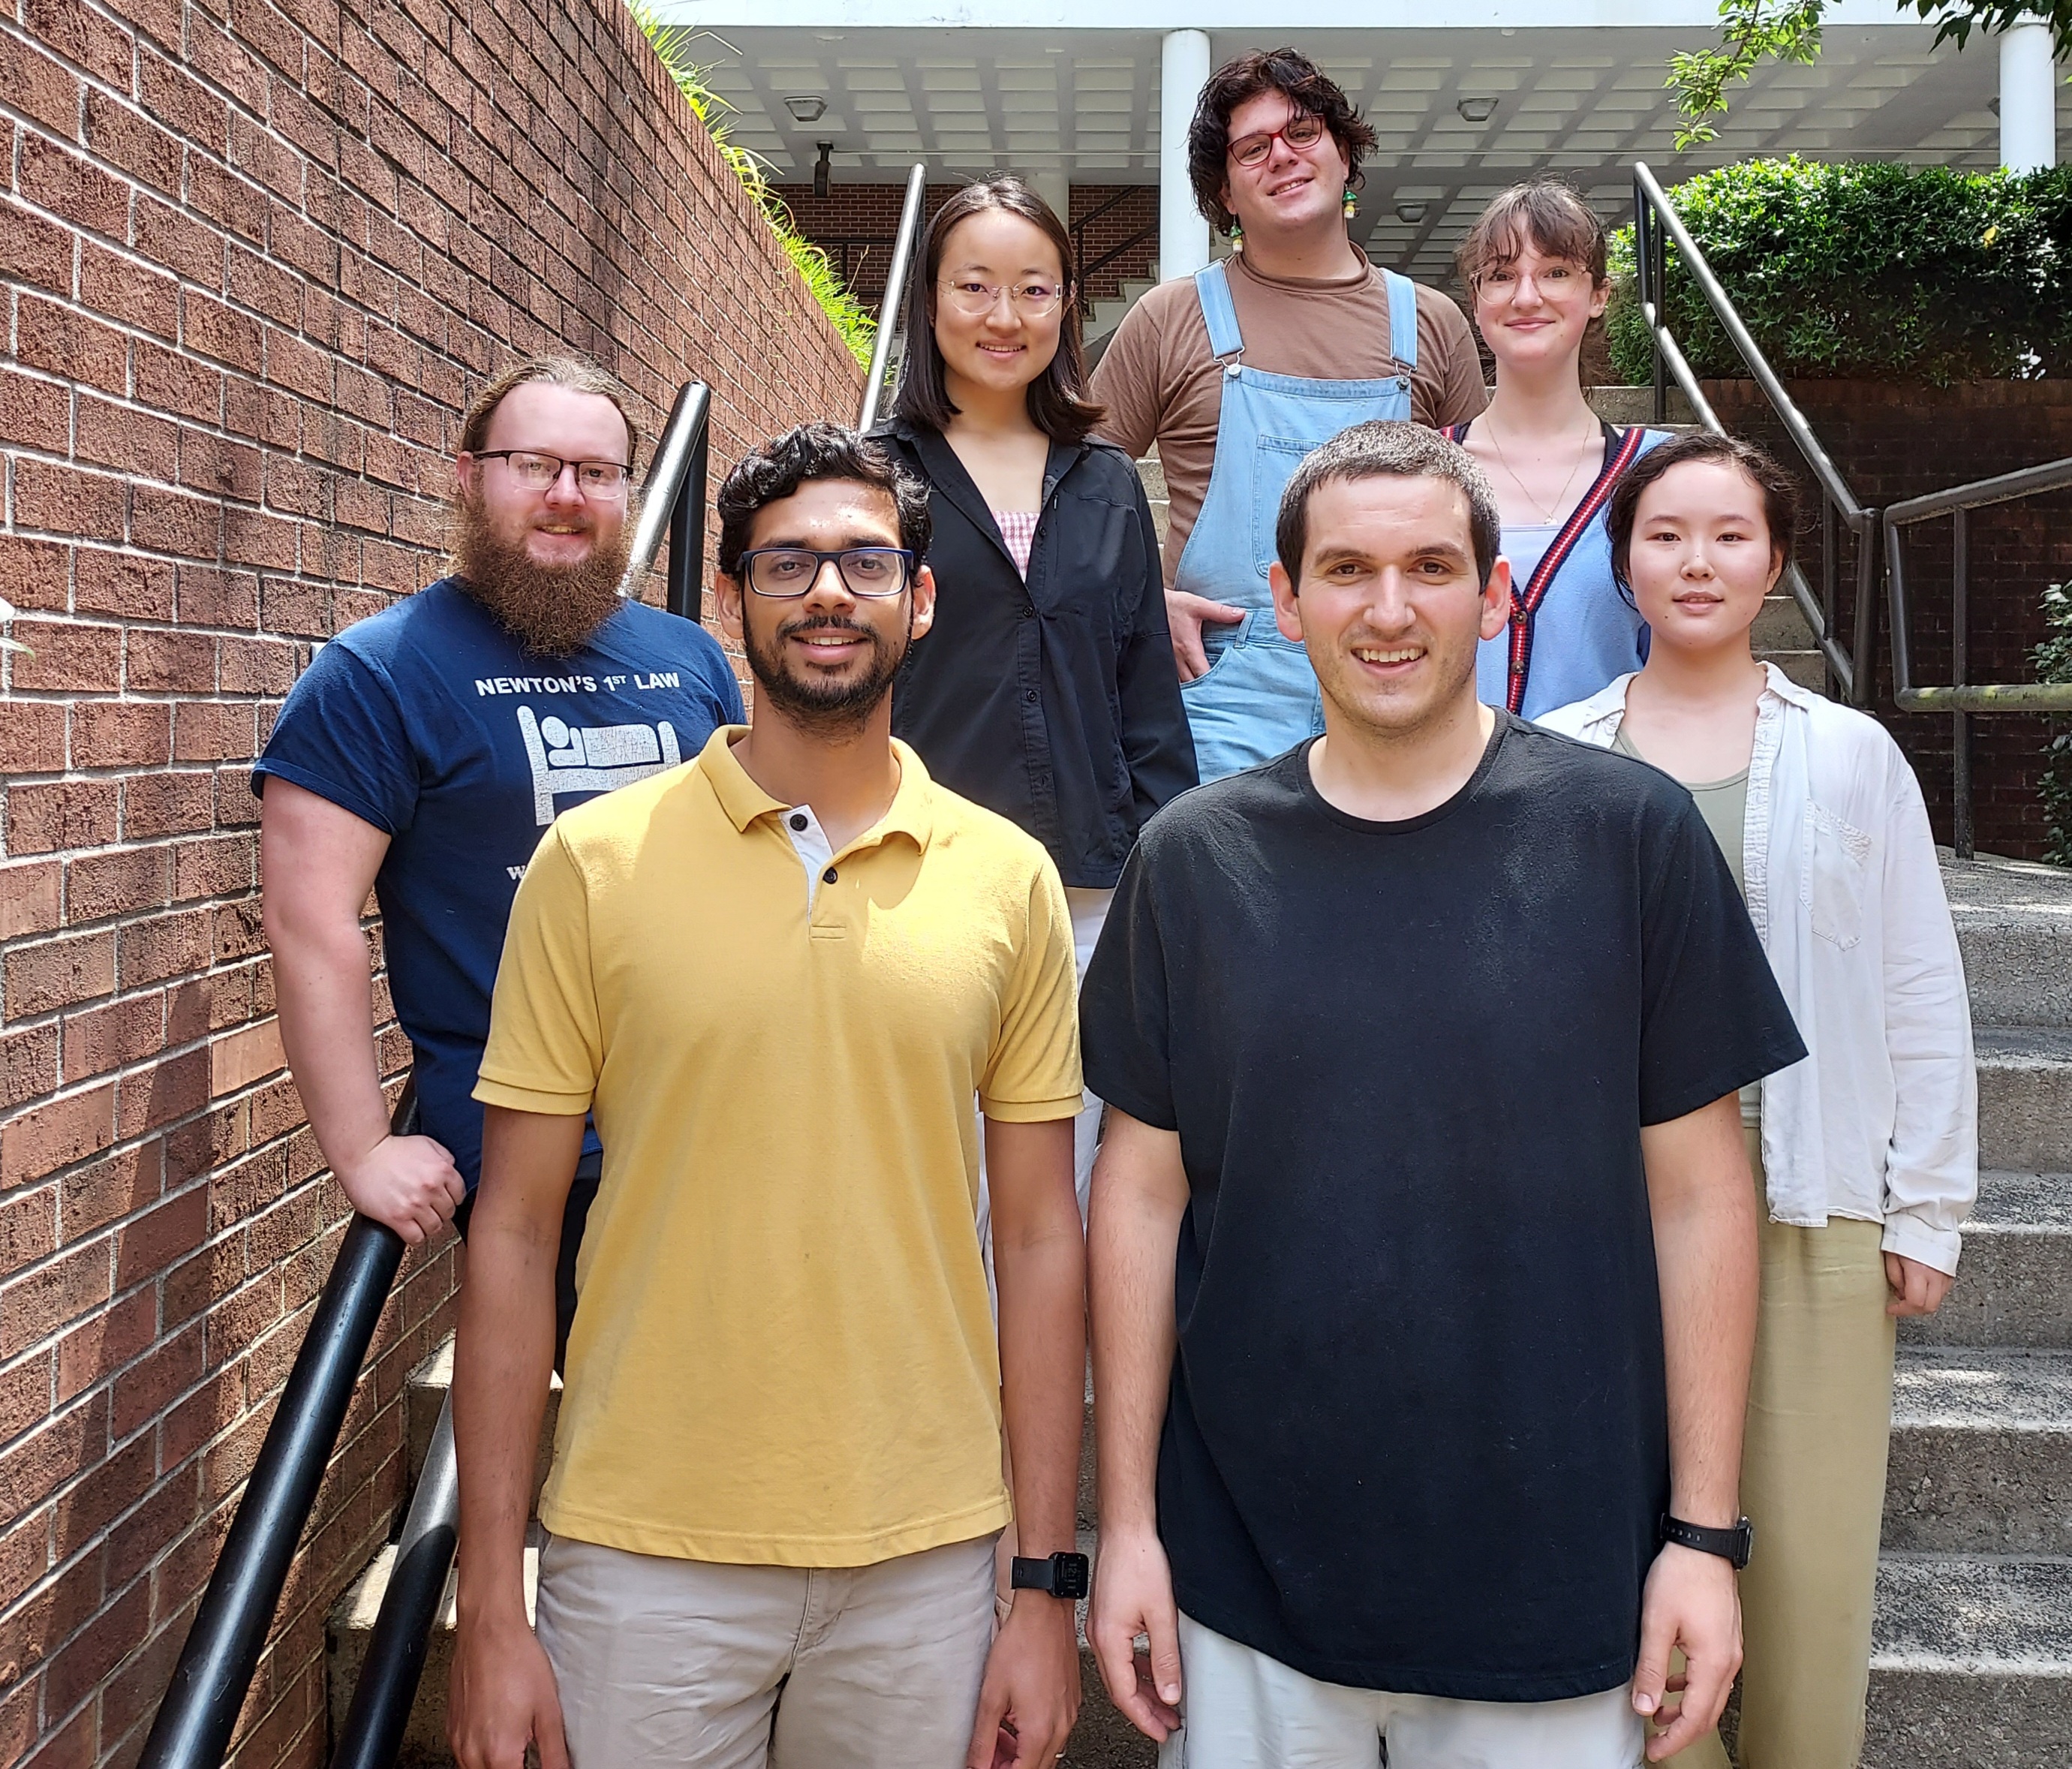 Our REU group standing on steps in the Skiles courtyard